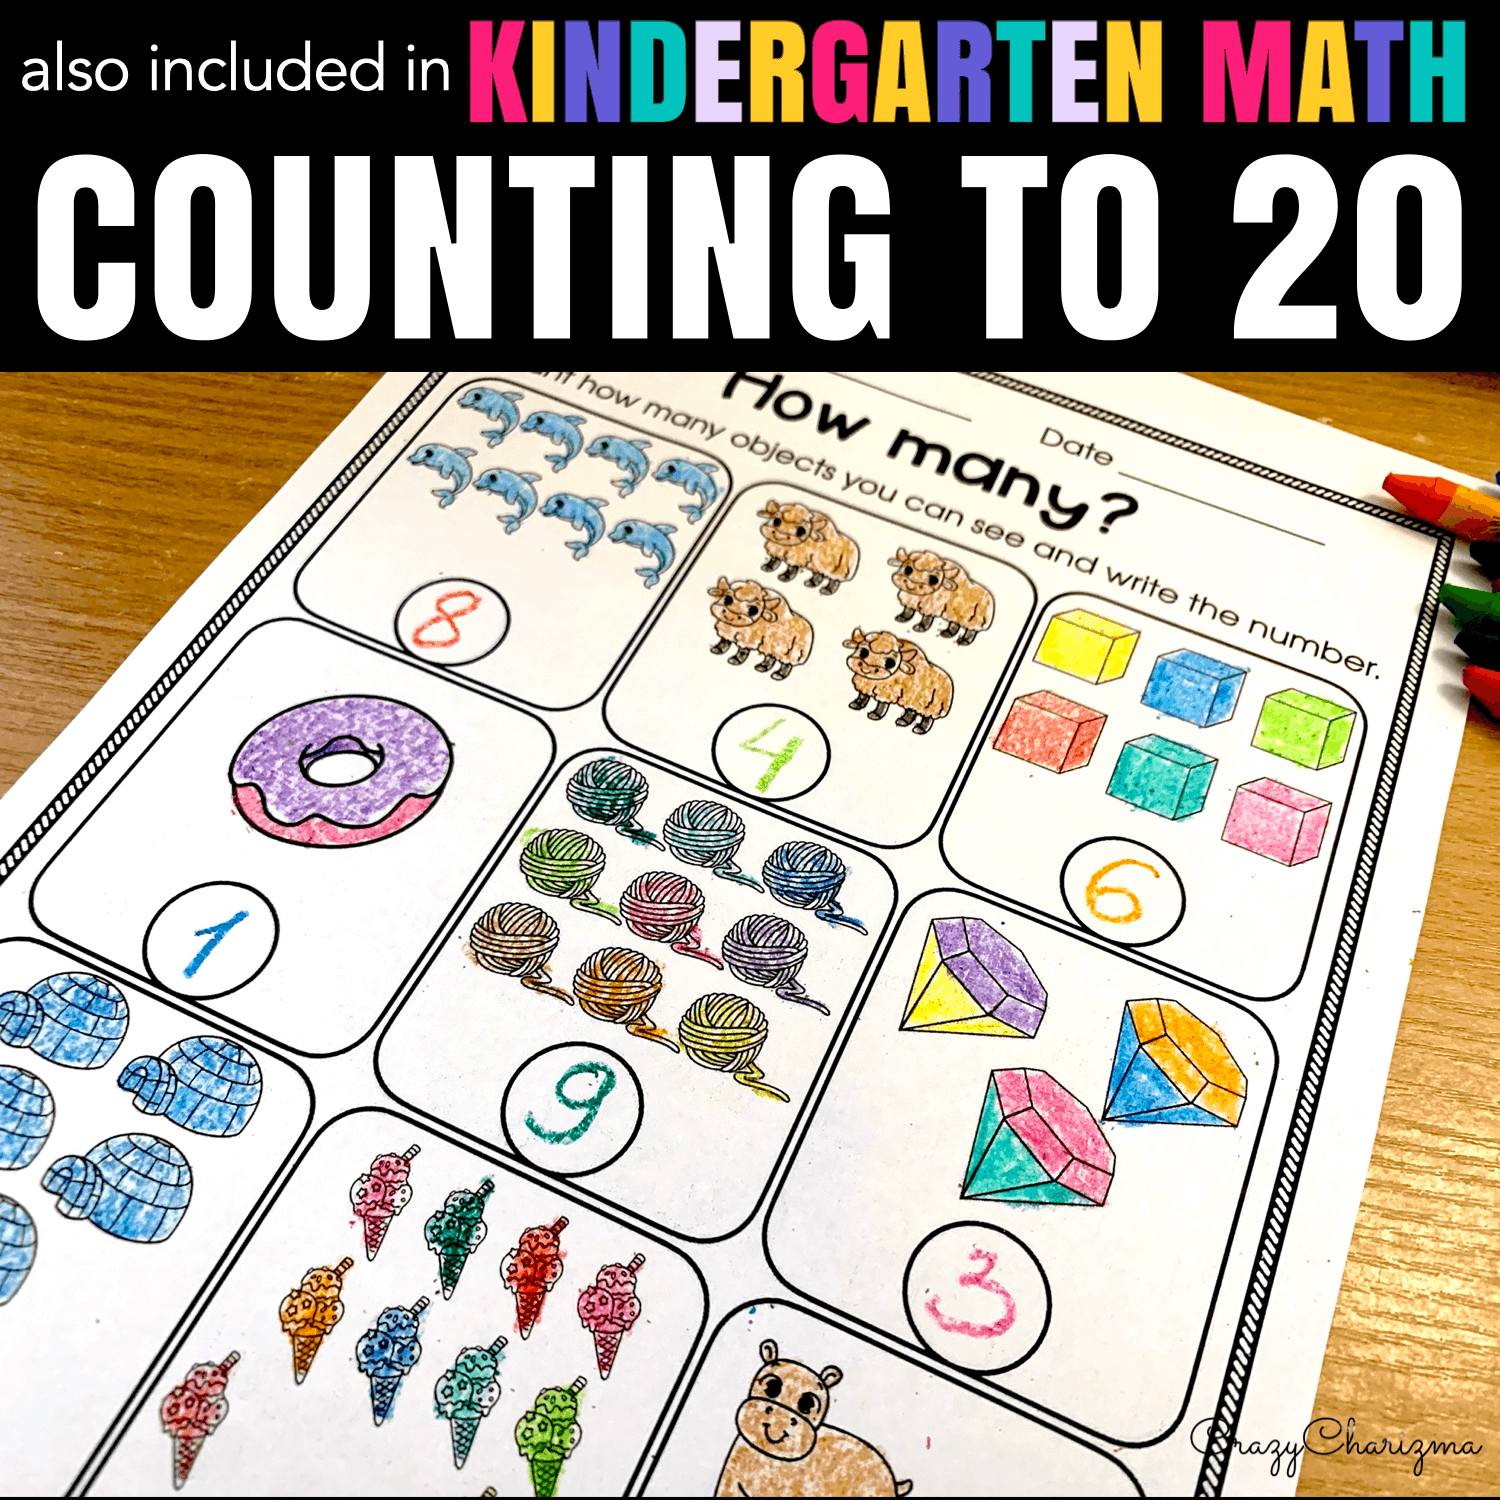 Counting Objects to 20 Worksheets